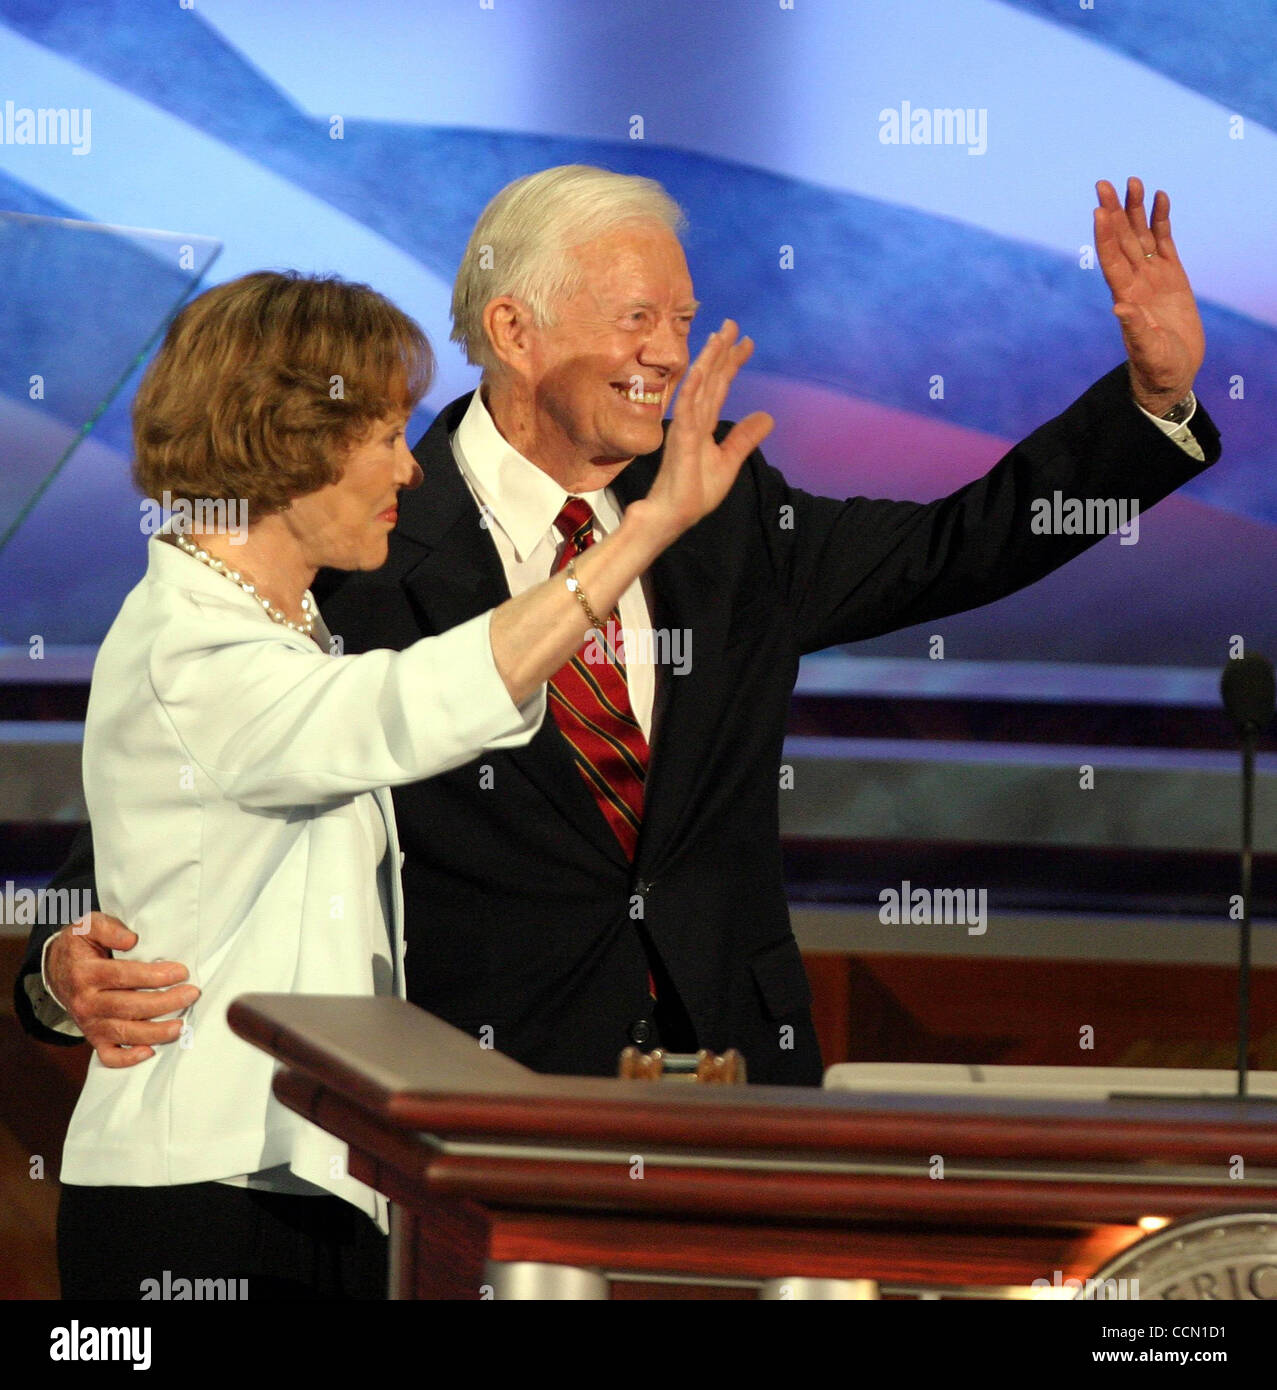 Photo by Richard Graulich/Cox News Service Slug: COX-DEMS-CARTER27 BOSTON...  Former President Jimmy Carter and wife Rosalyn wave to the crowd following hi address to  the 2004 Democratic National Convention Monday night in Boston.  (Photo by Richard Graulich/Cox News Service (The Palm Beach Post)   Stock Photo